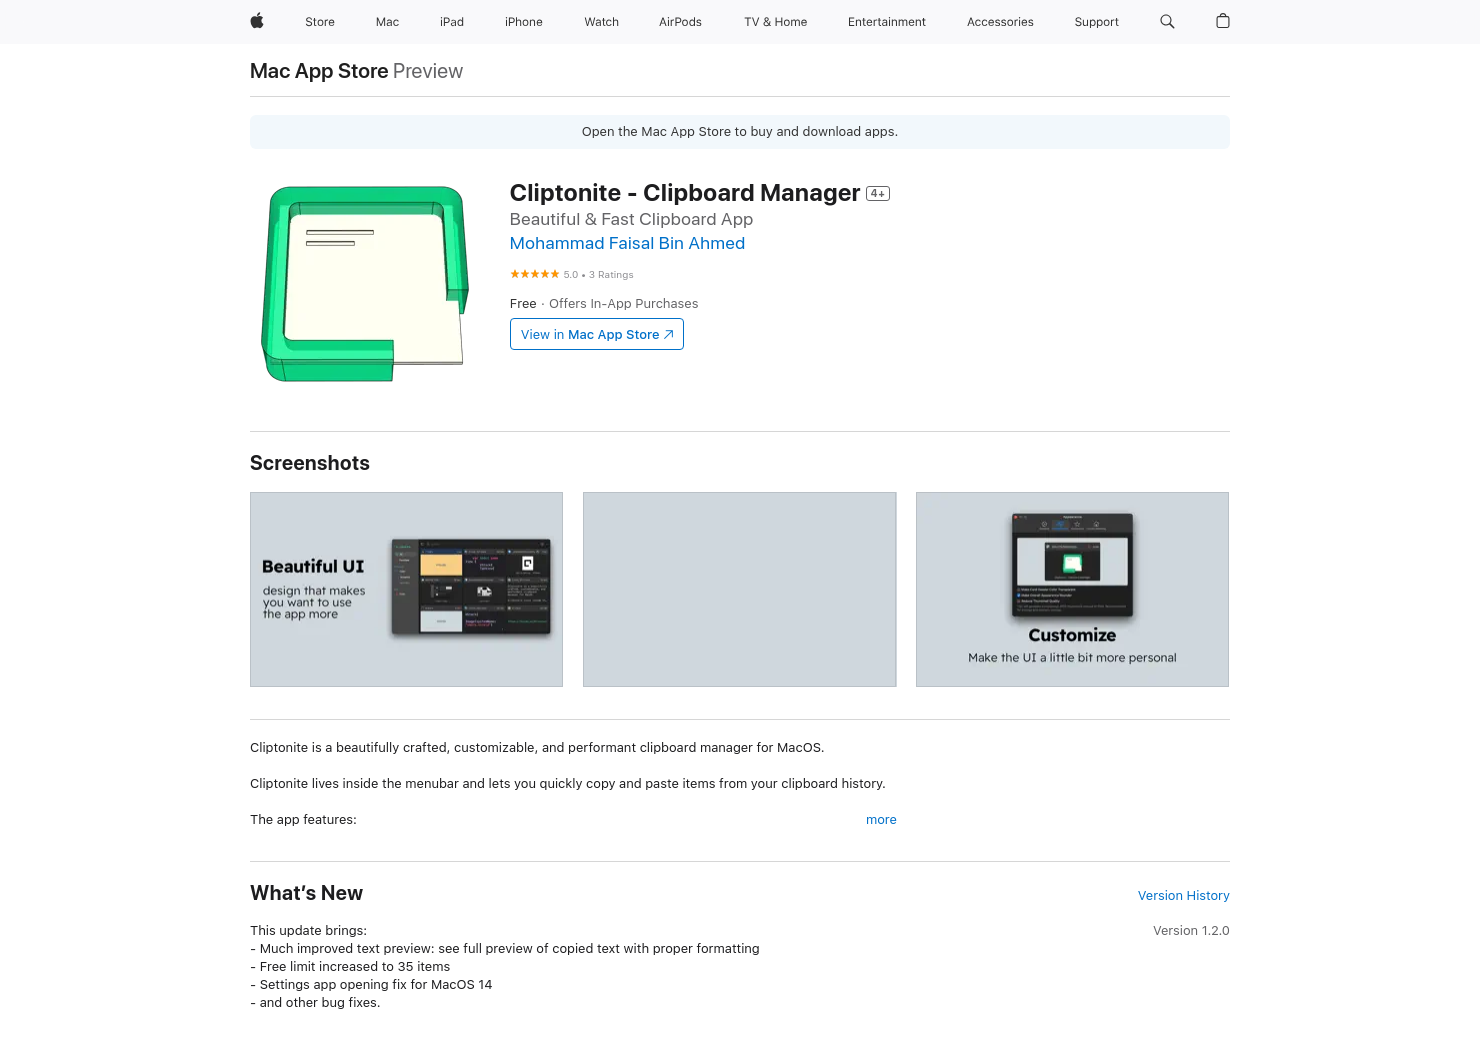 startuptile Cliptonite - Clipboard Manager-A beautifully crafted & performant clipboard manager